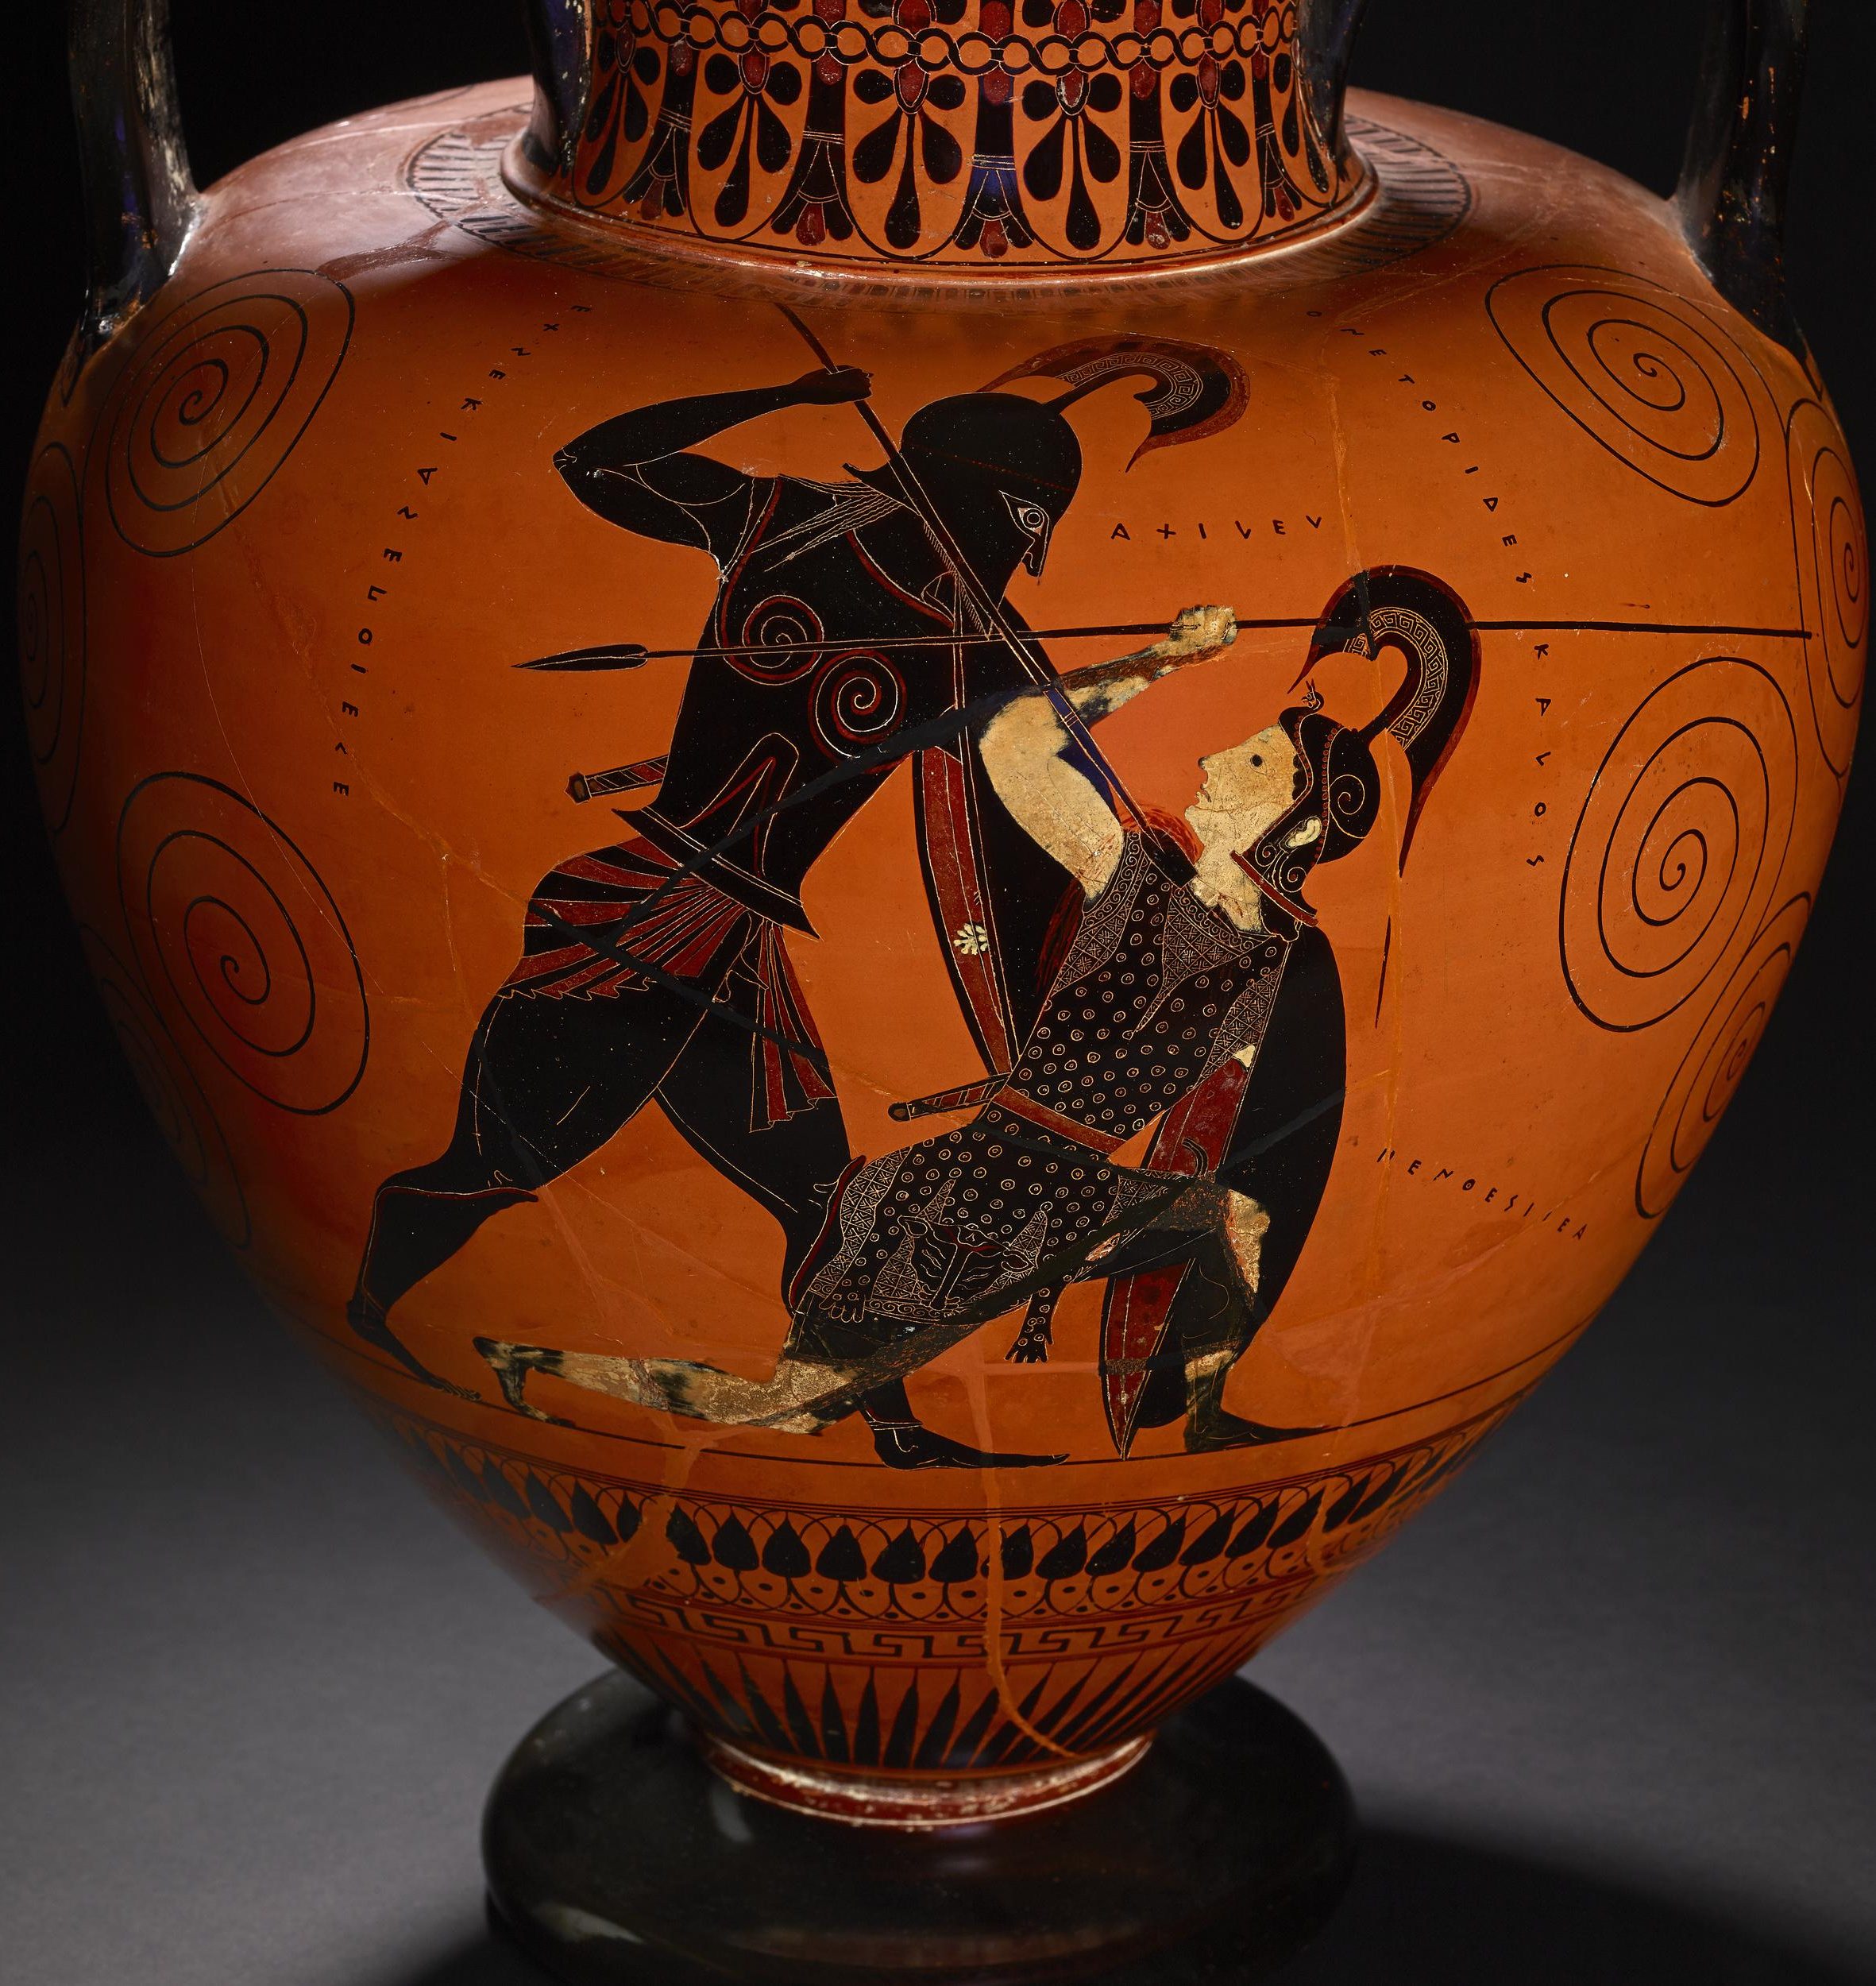 Achilles, with helm and shield, stabs Penthesilea with a spear. Penthesilea wears a tunic and helm, and wields a spear and shield. She has fallen to one knee, and stares up at Achilles.